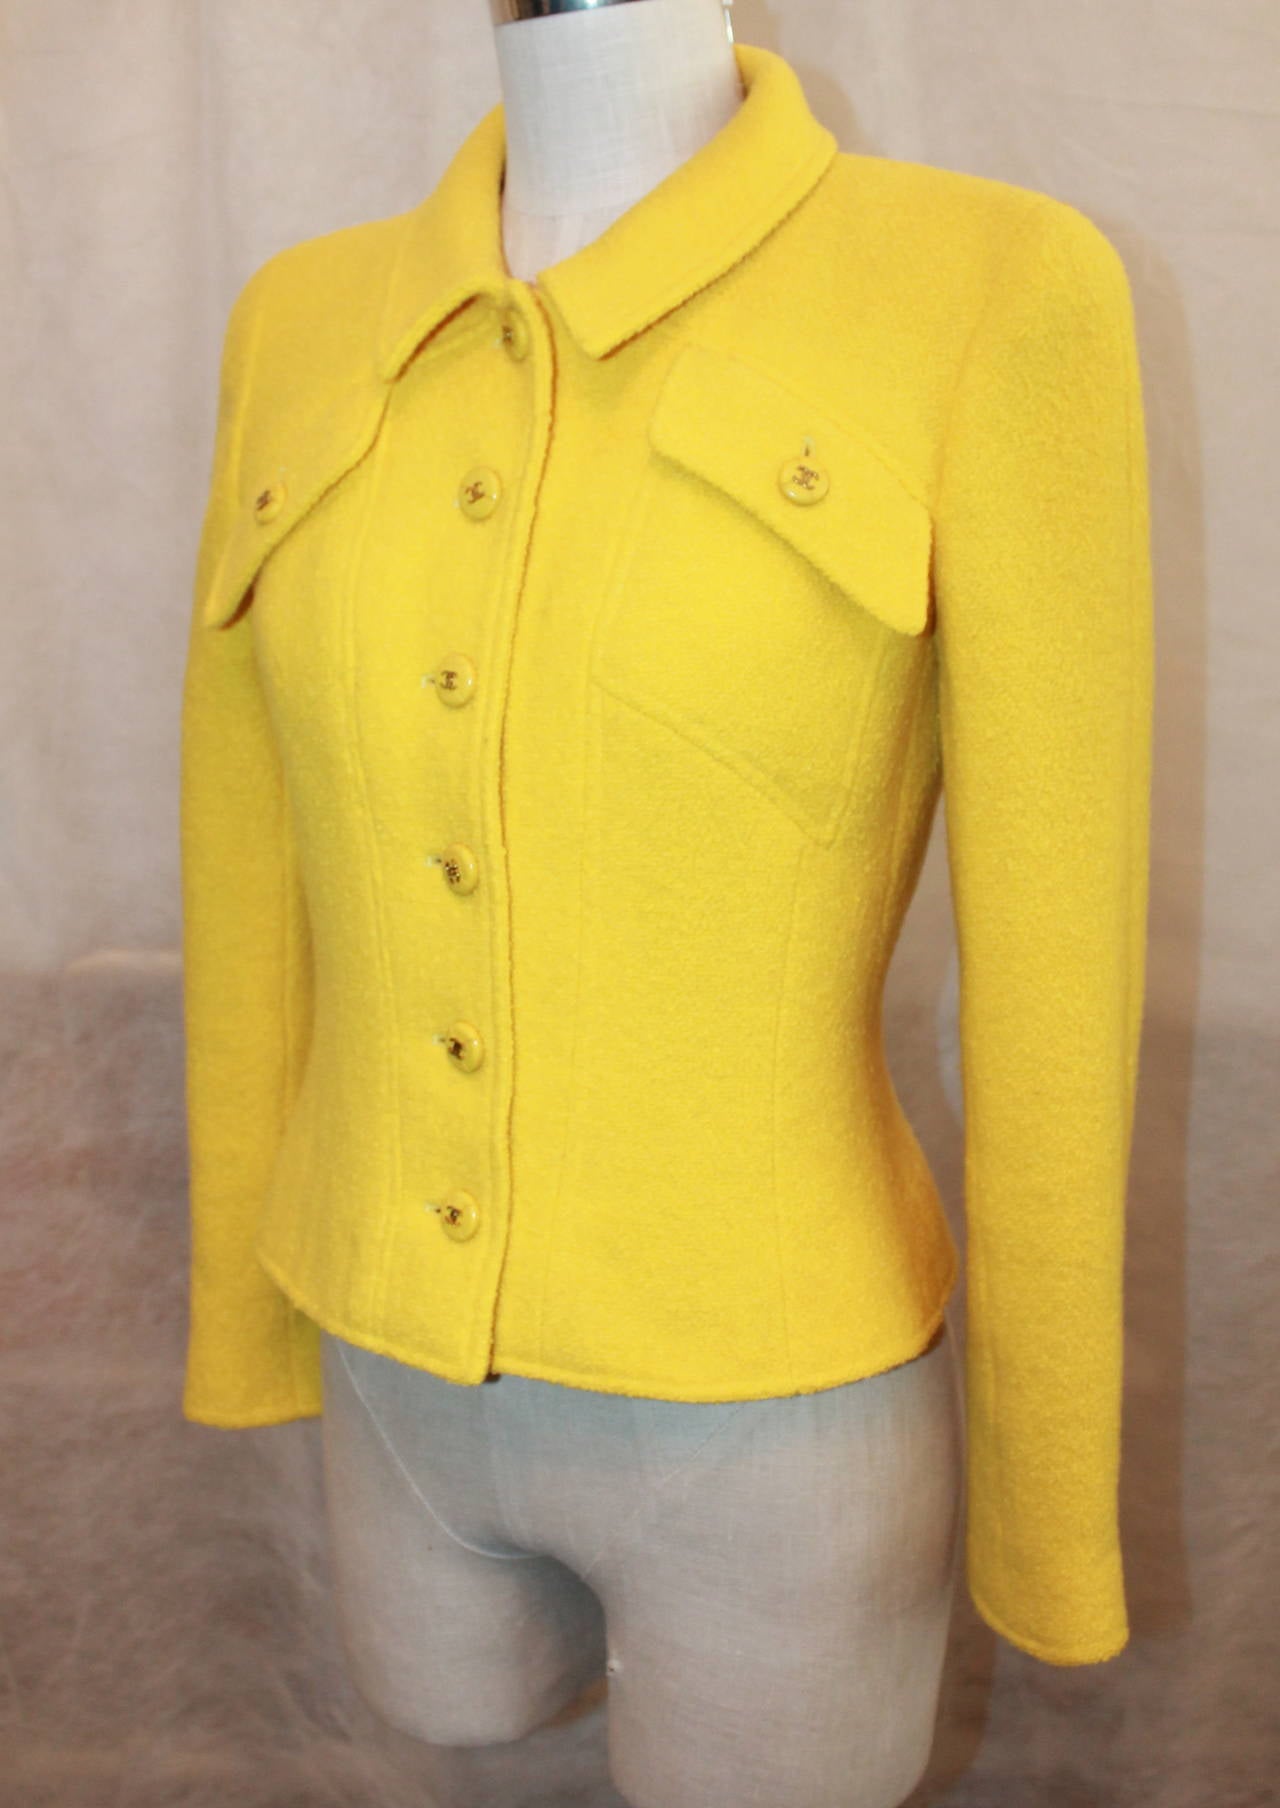 Chanel 1980's Yellow Tweed Single Breasted Jacket - 36. This jacket is in excellent vintage condition with light use. It has 6 buttons for closure and 2 flap pockets on the top of the jacket. It is 100% wool. 

Measurements:
Bust- 35